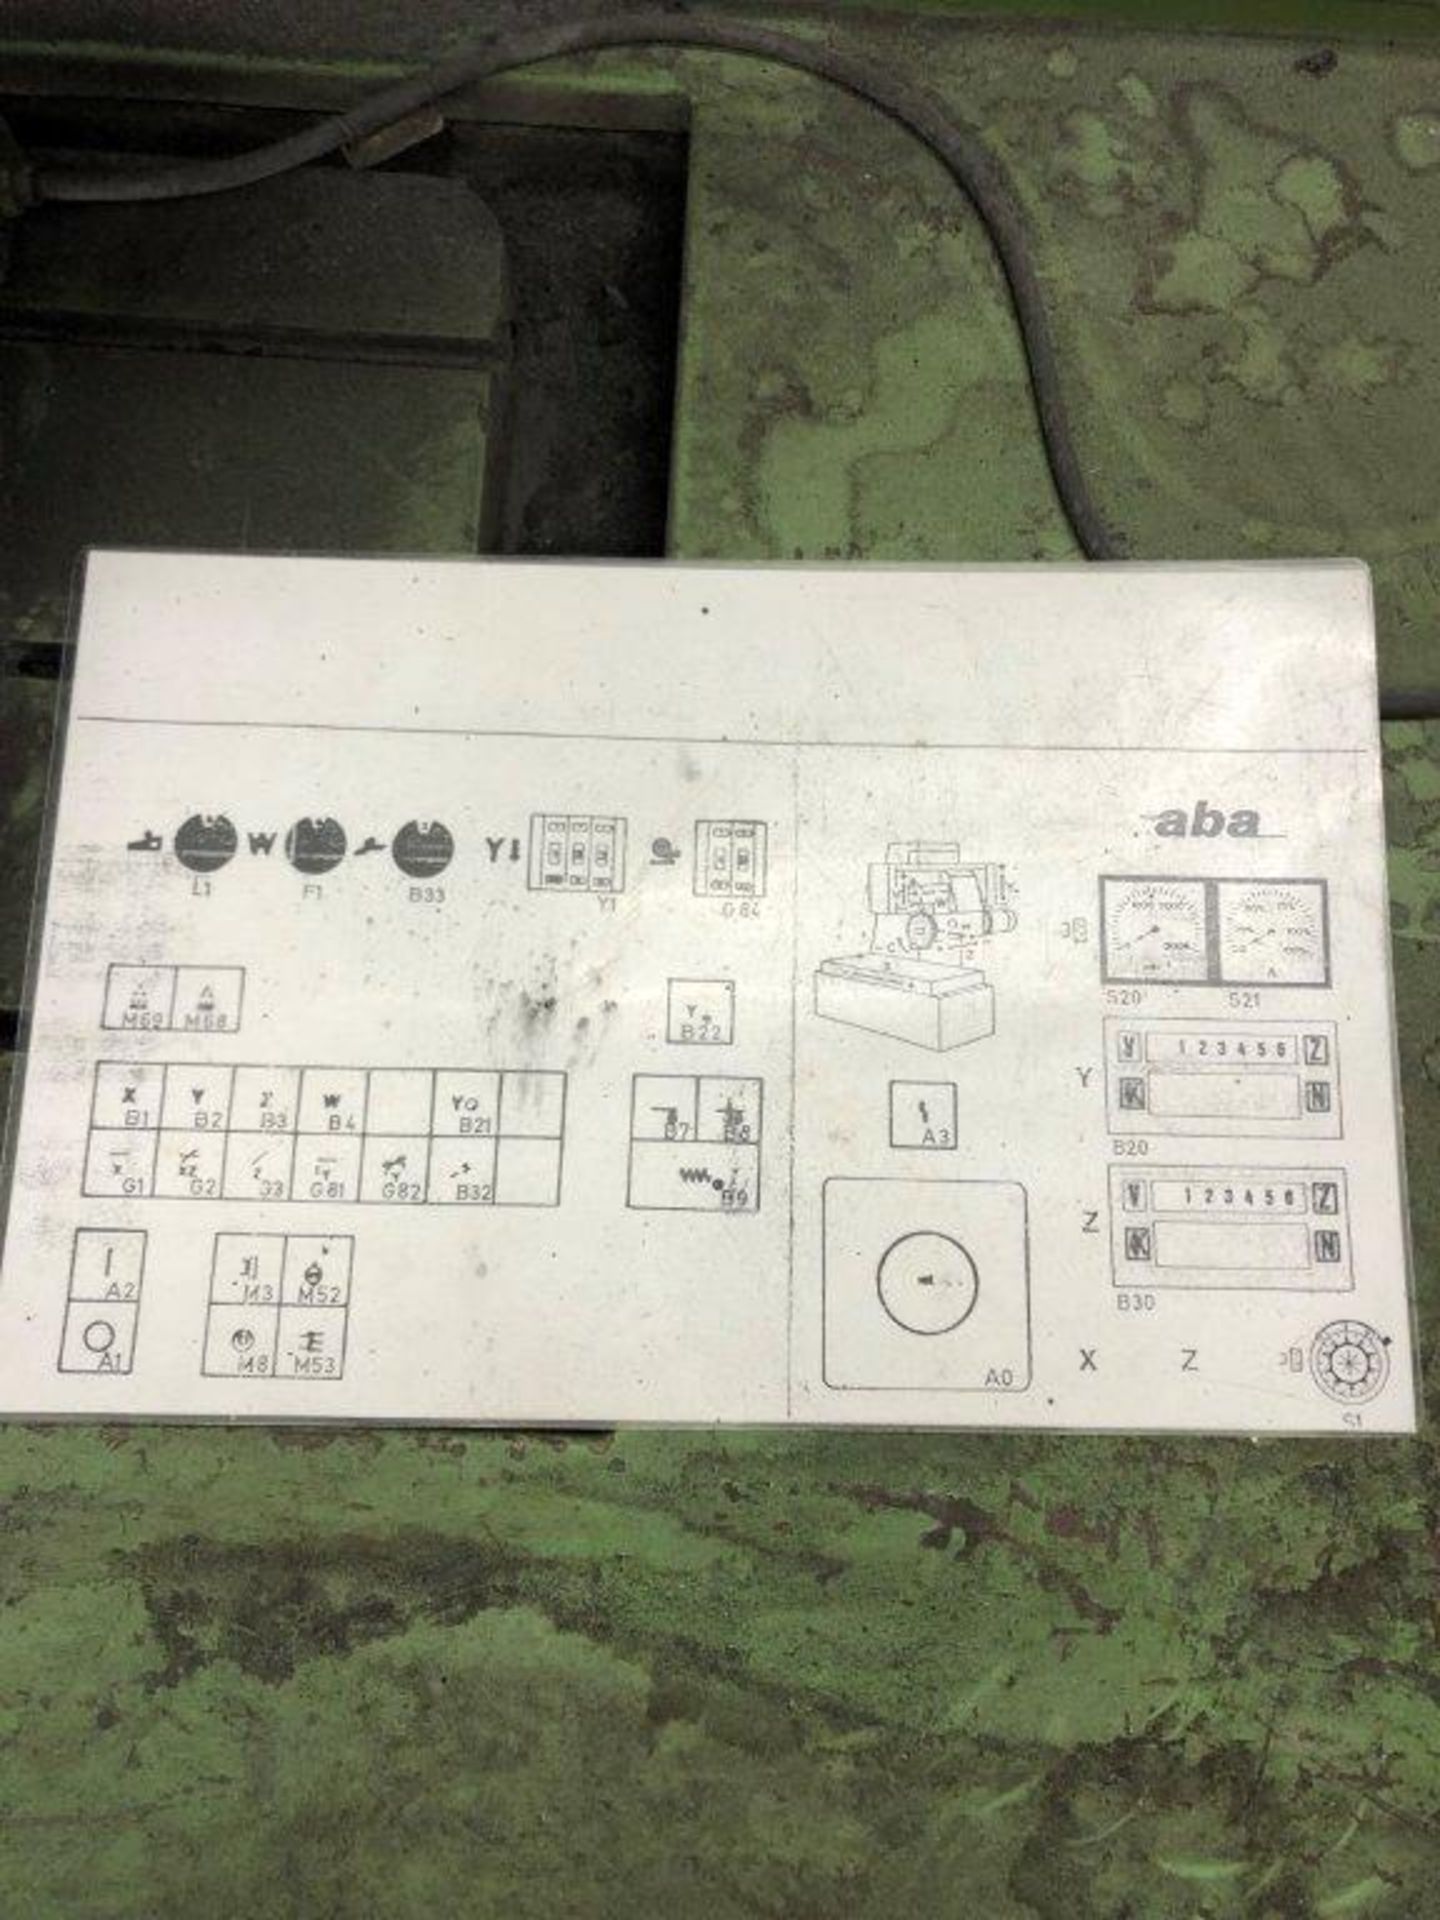 Aba FFU 1000/50 Surface Grinder, S/N 207990 (New 1986), 15.75" x 39" Electro-Magnetic Chuck - Image 9 of 10